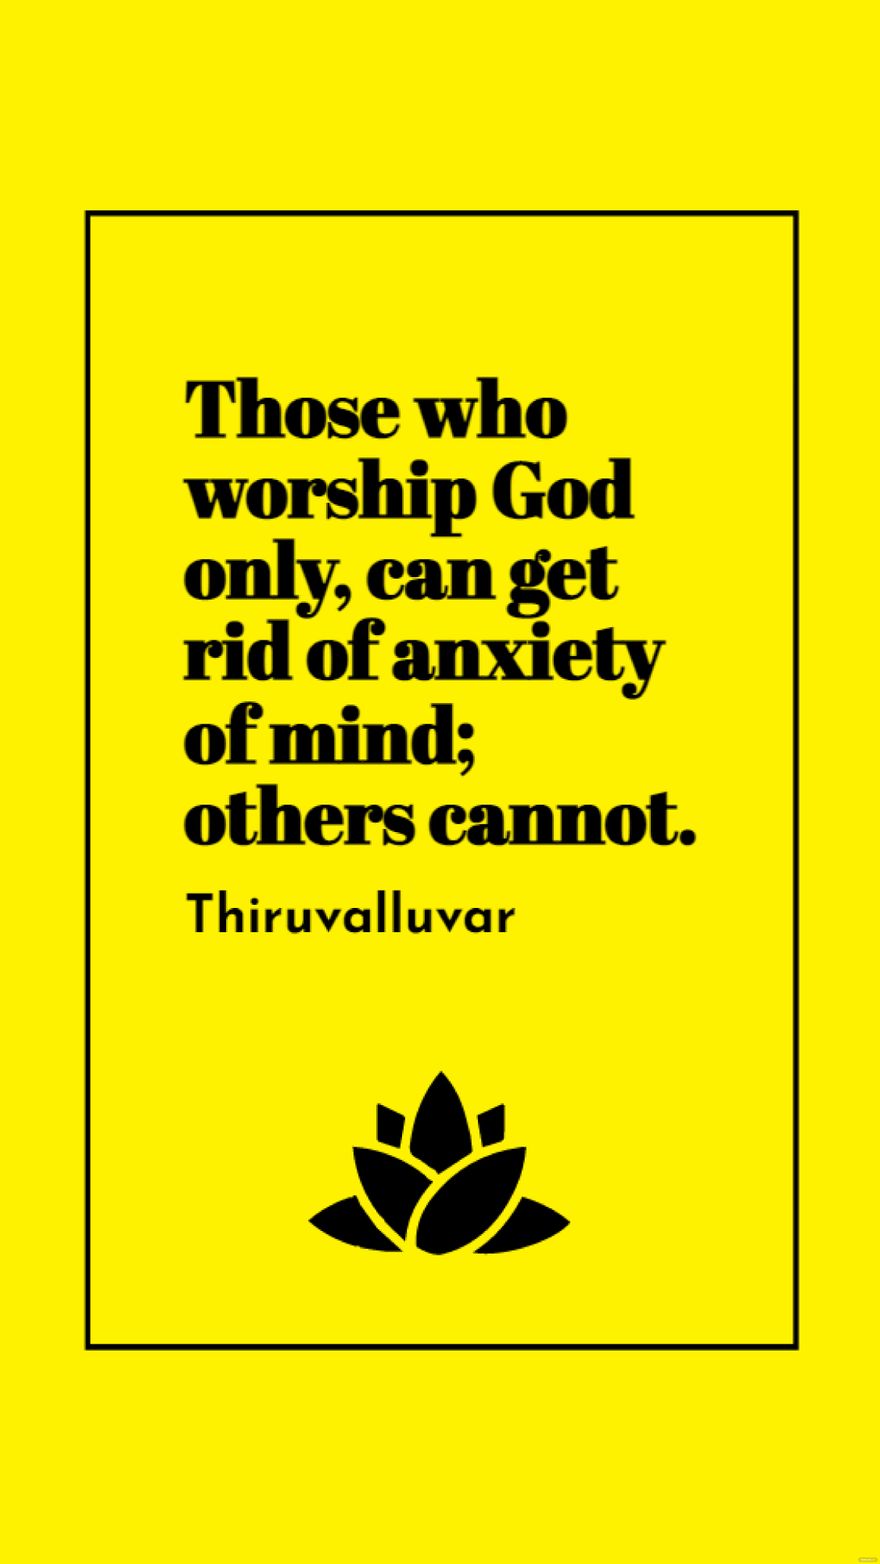 Thiruvalluvar - Those who worship God only, can get rid of anxiety of mind; others cannot.